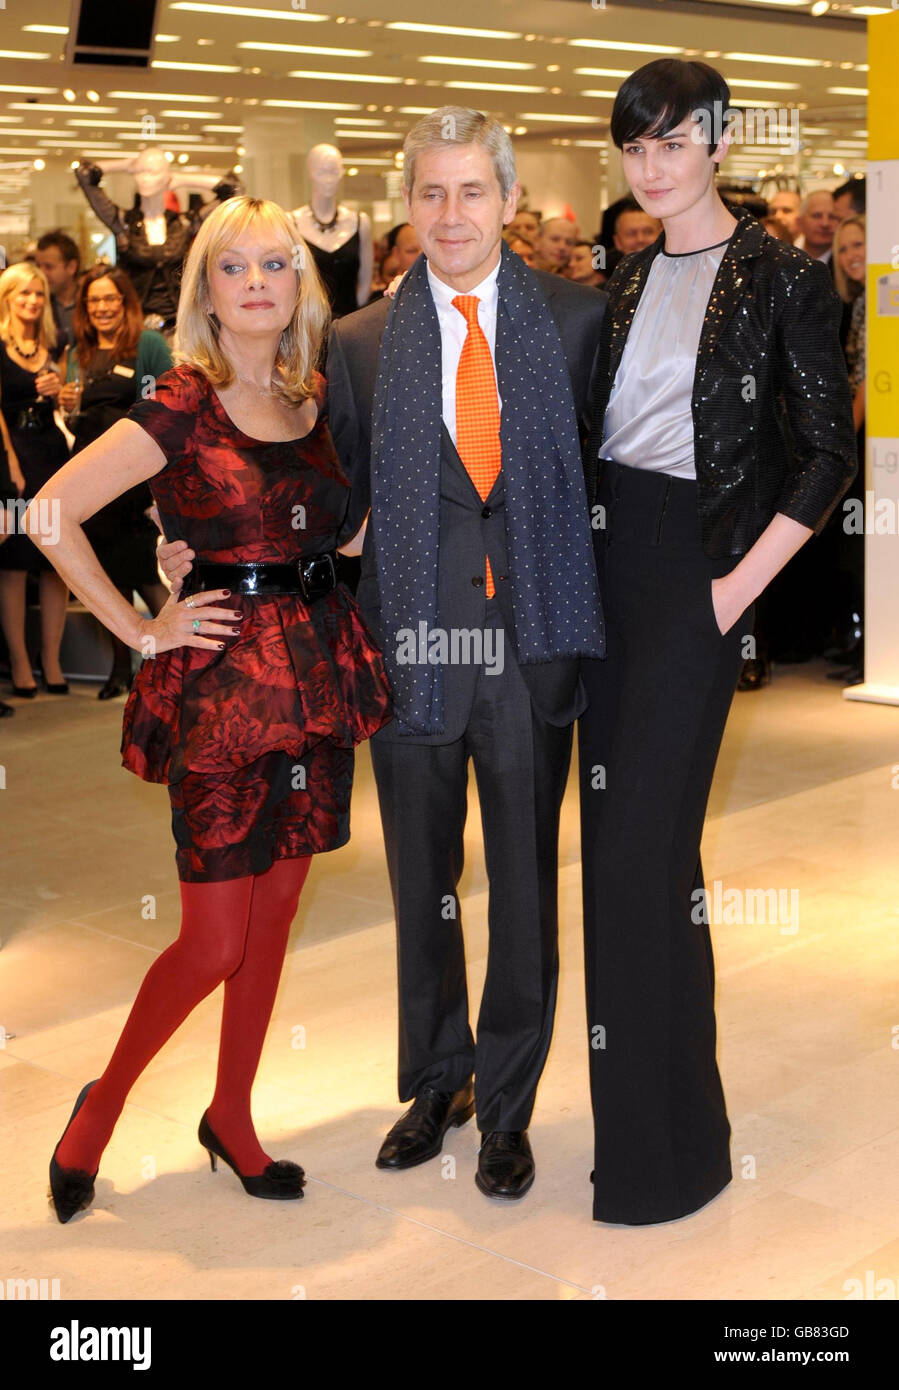 (From left to right) Twiggy, Stuart Rose of Marks and Spencer and Erin O'Connor officially unveil the Marks and Spencer store during the official opening of the Westfield Shopping Centre in White City, west London, on its opening day. Stock Photo